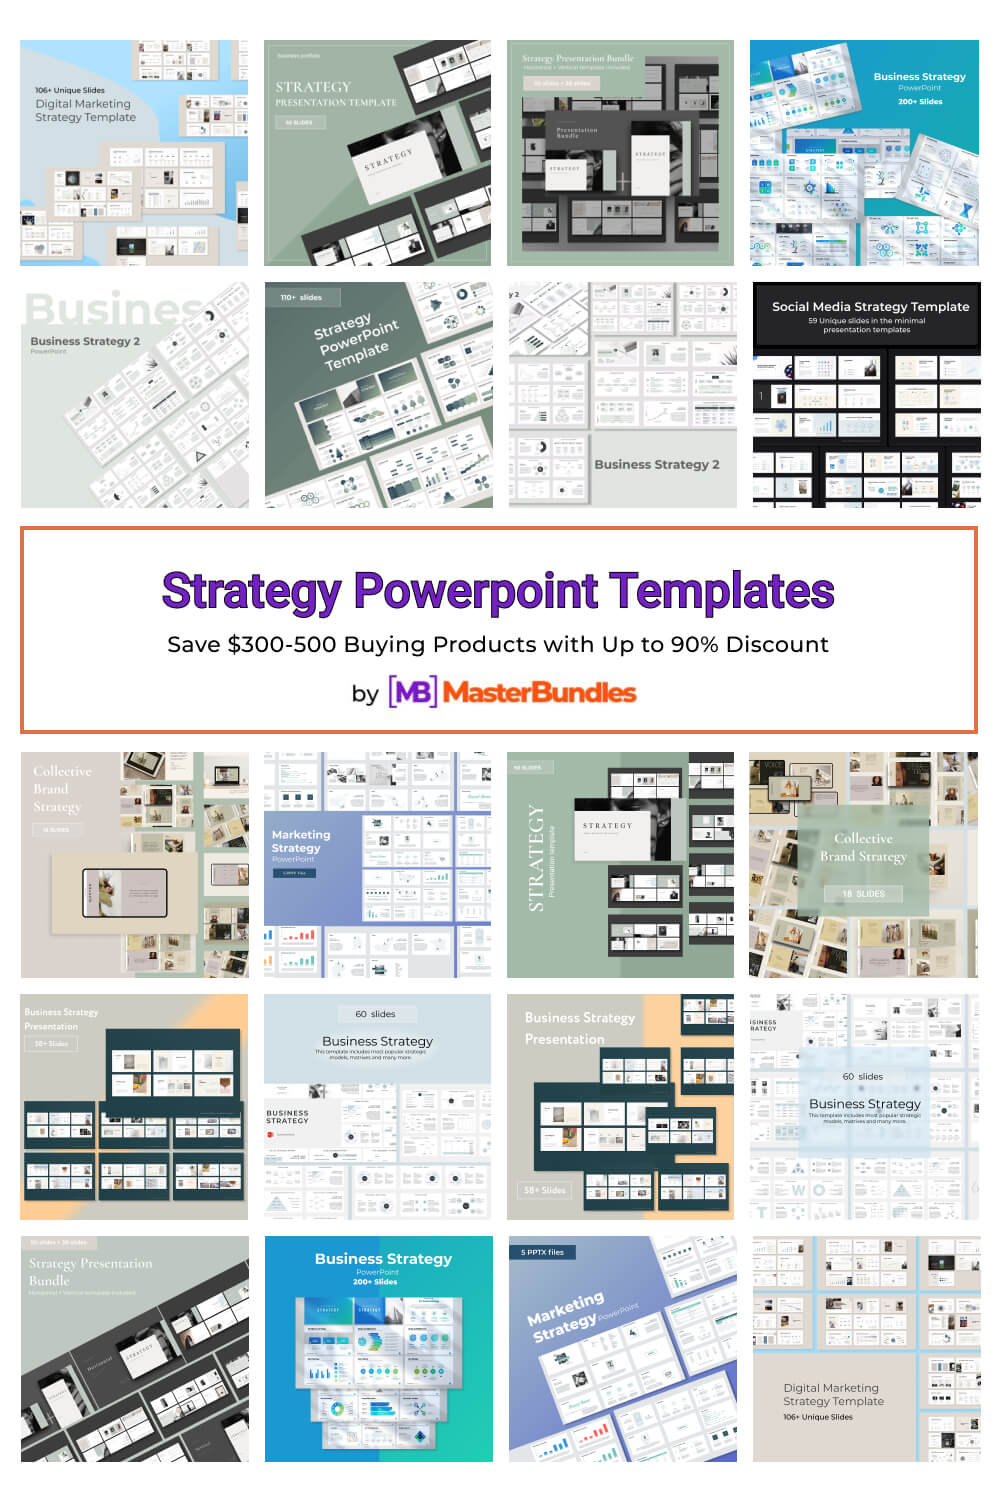 strategy powerpoint templates pinterest image.